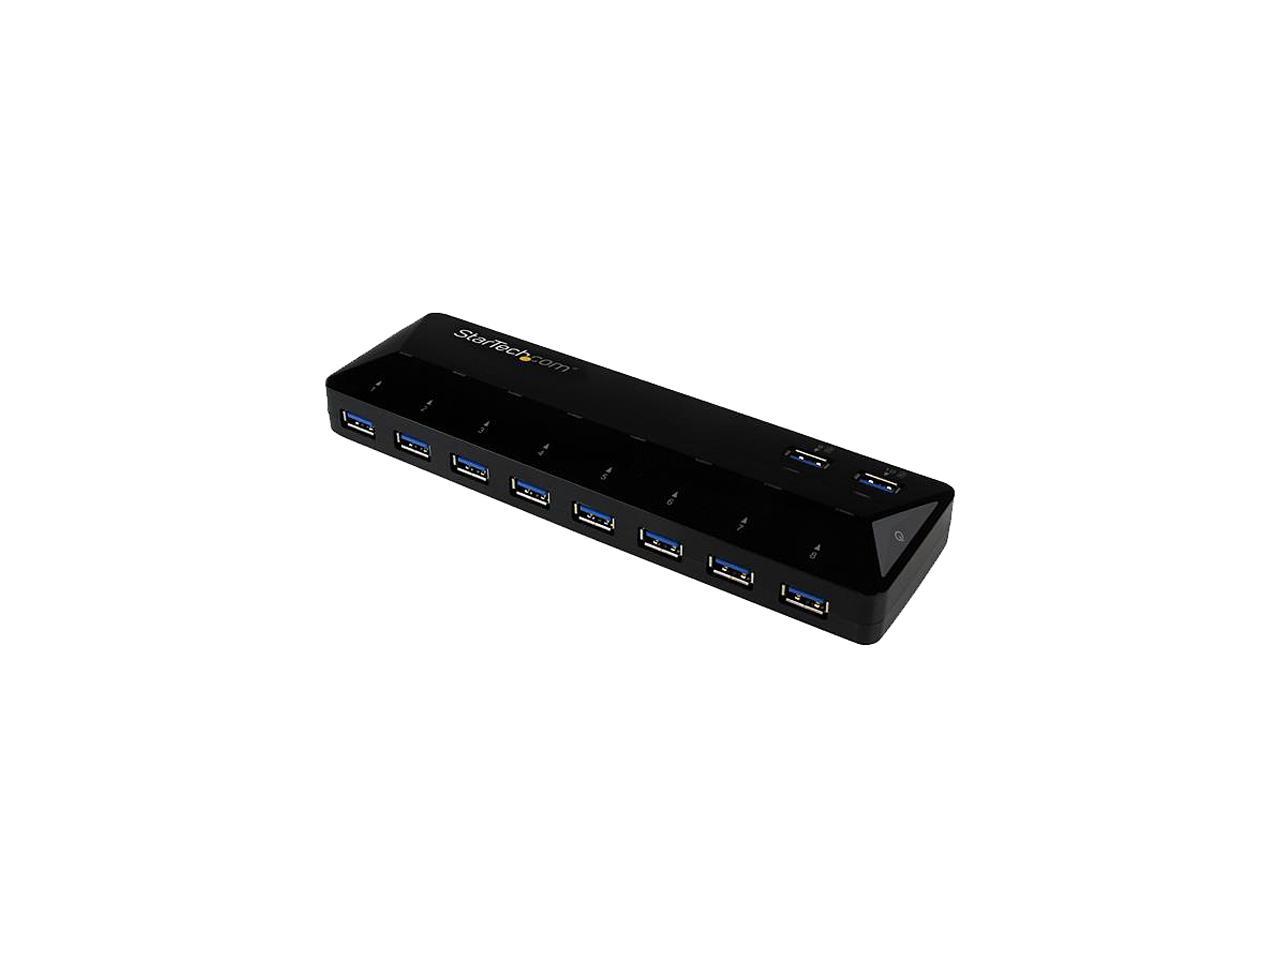 StarTech.com ST103008U2C 10-Port USB 3.0 Hub with Charge and Sync Ports - 2x 1.5A Ports - USB Hub and Fast-Charging Station with 48W Power Adapter